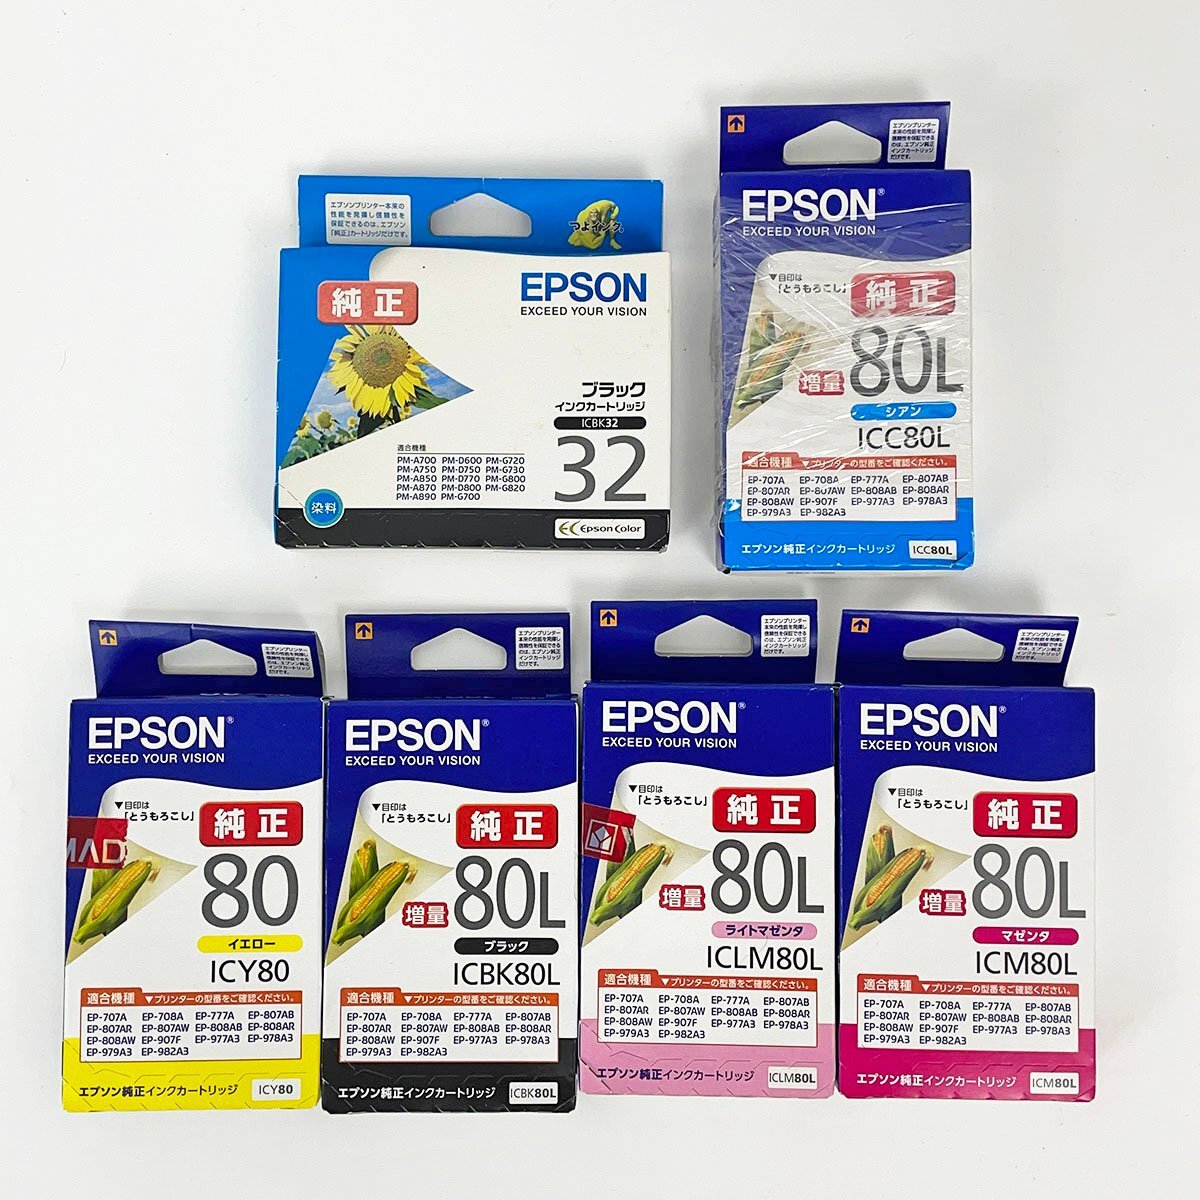  junk printer ink Epson Canon word-processor for ink ribbon set sale interchangeable goods large amount set [F6640]